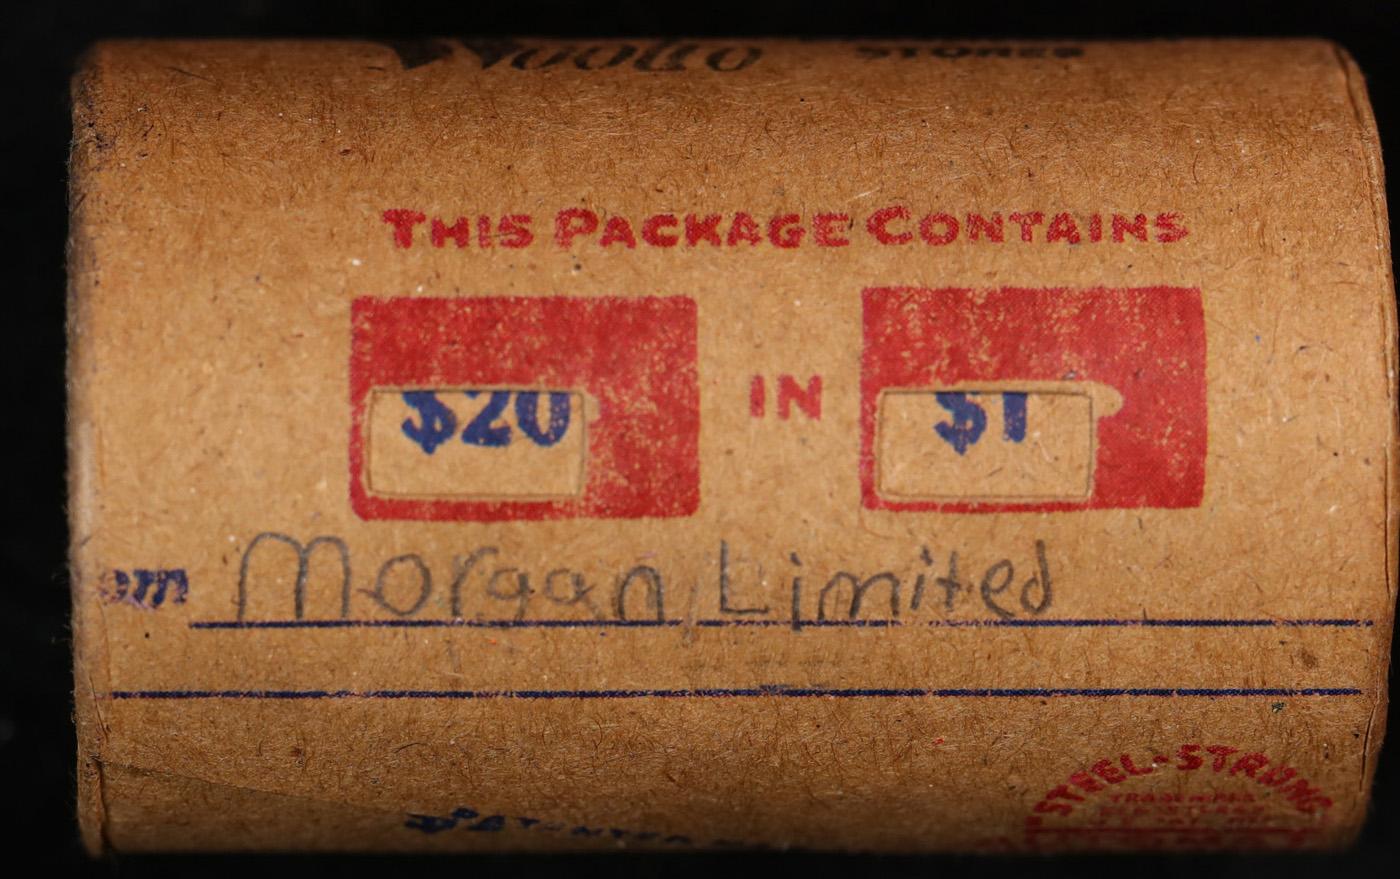 High Value! - Covered End Roll - Marked " Morgan Limited" - Weight shows x20 Coins (FC)